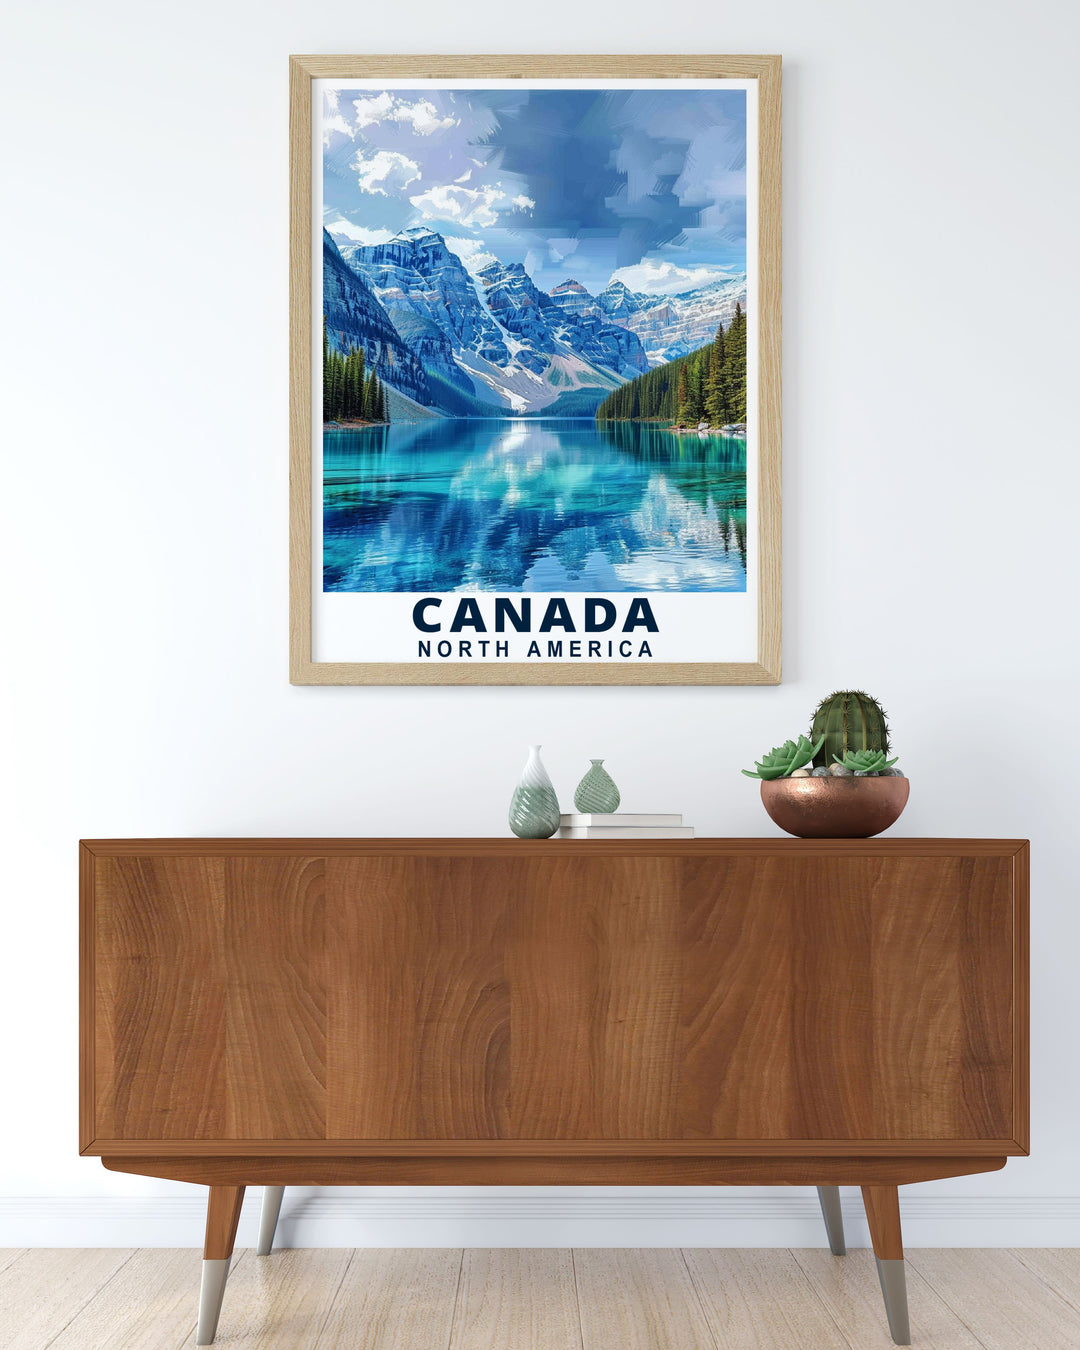 Featuring lush landscapes of Banff National Park and the iconic Lake Louise, this poster is ideal for those who wish to bring a piece of Canadas natural beauty into their home.